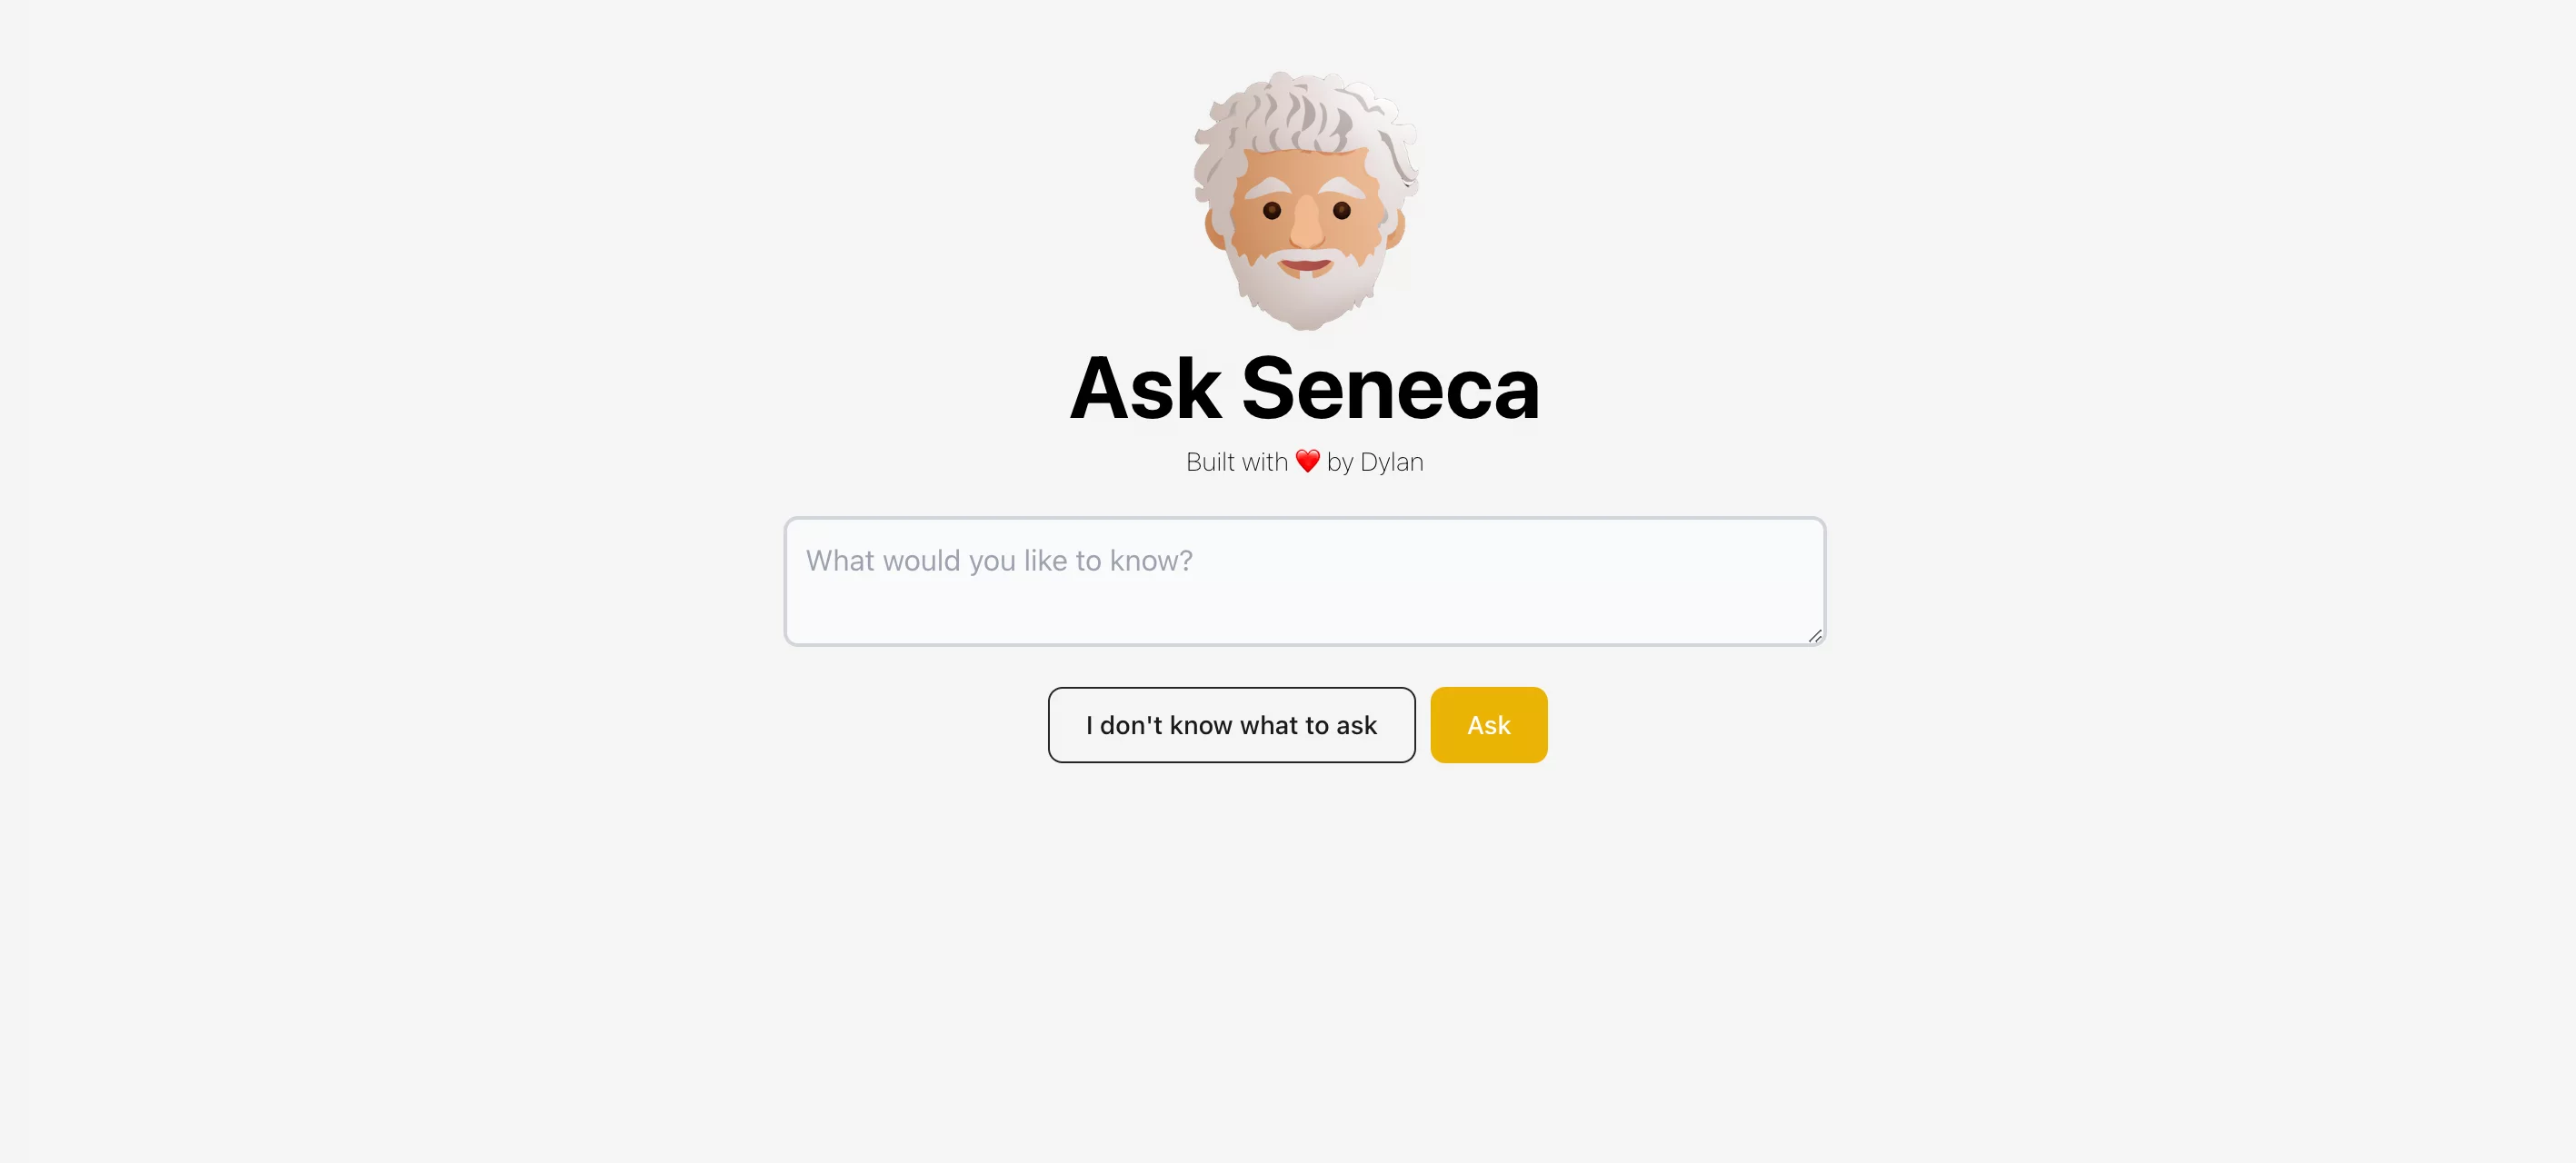  A tool to answer questions about Seneca